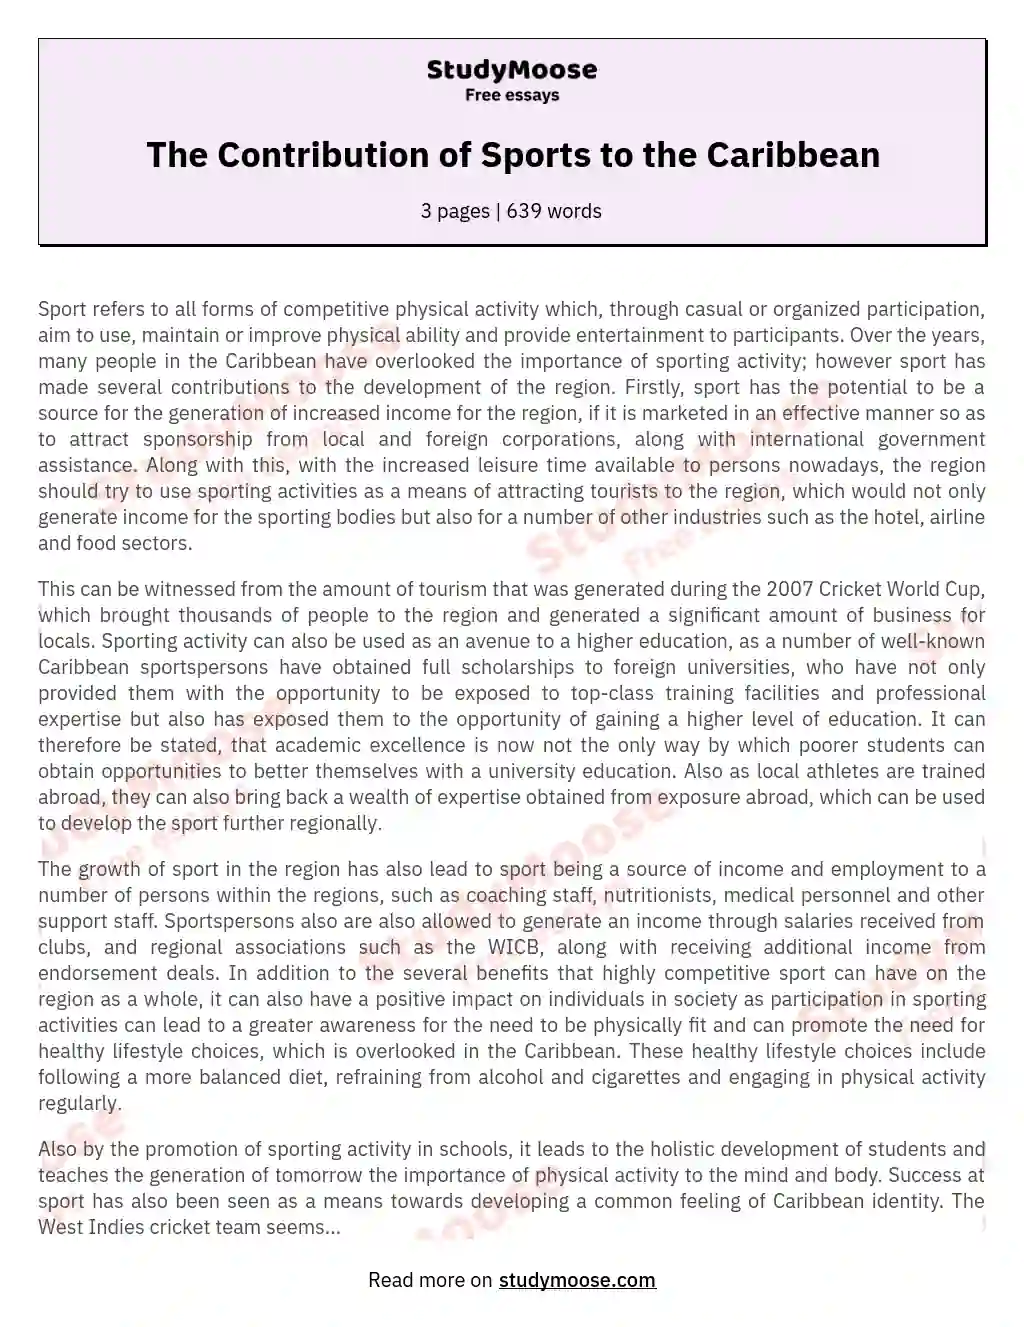 The Contribution of Sports to the Caribbean essay